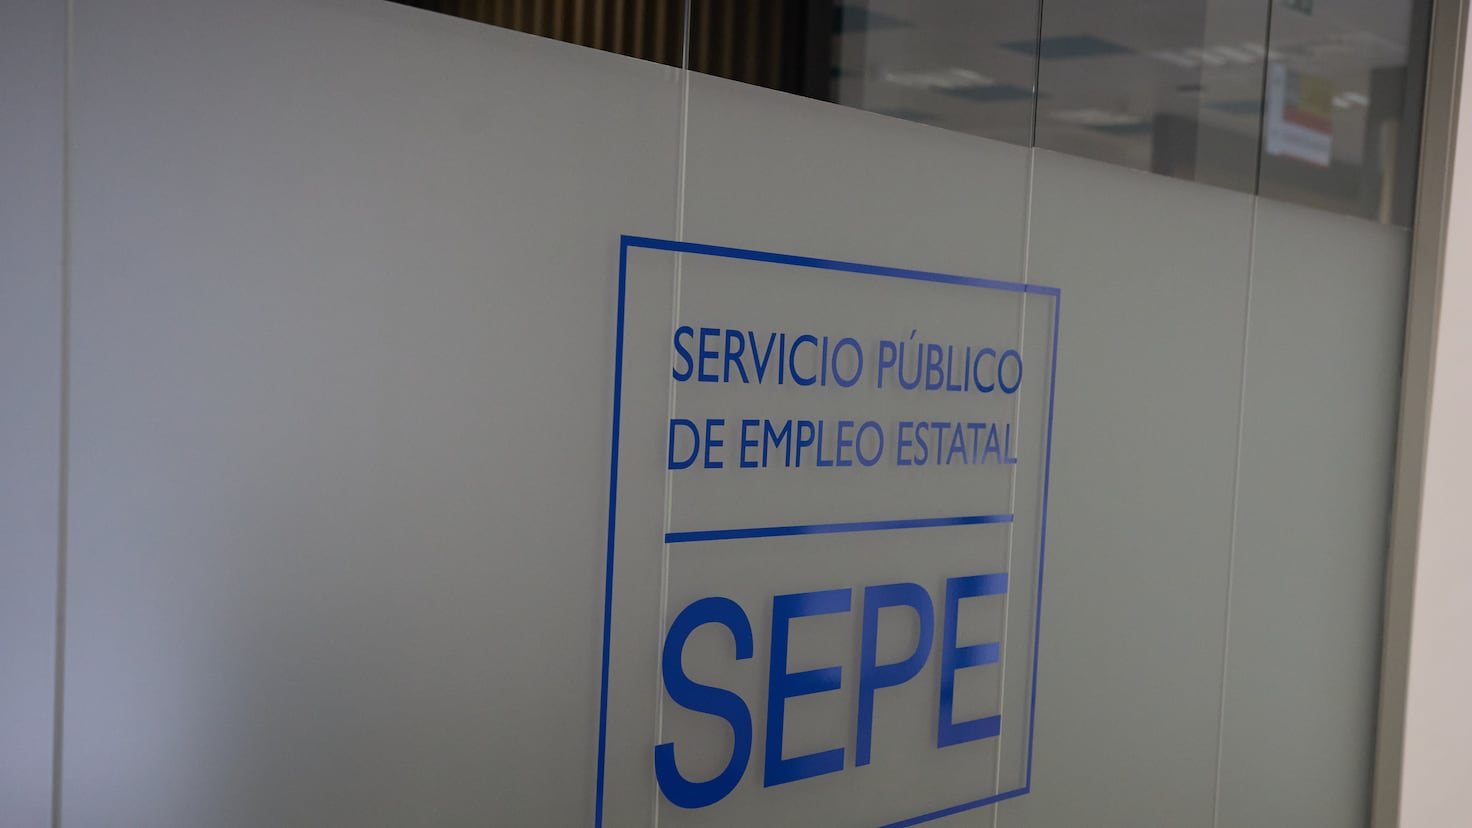 The SEPE course that gives you 600 euros if you are unemployed or working: the deadline is September 1
